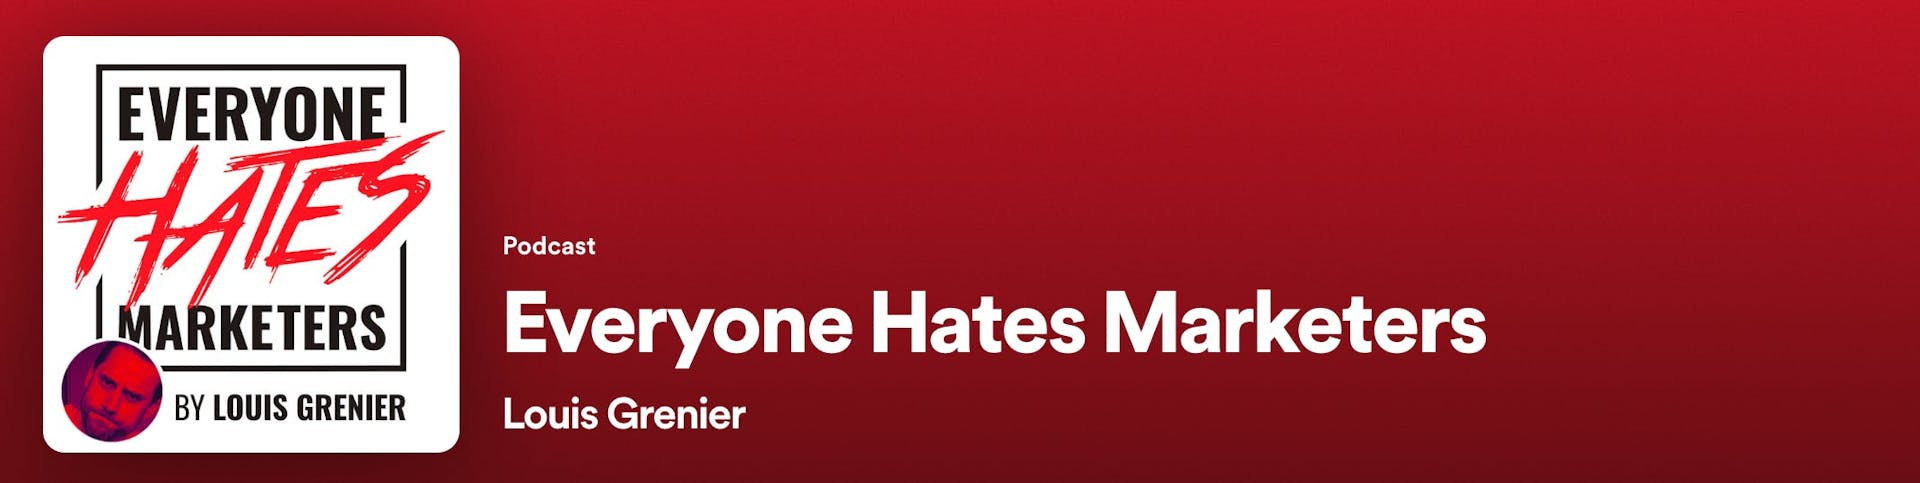 Everyone Hates Marketers podcast